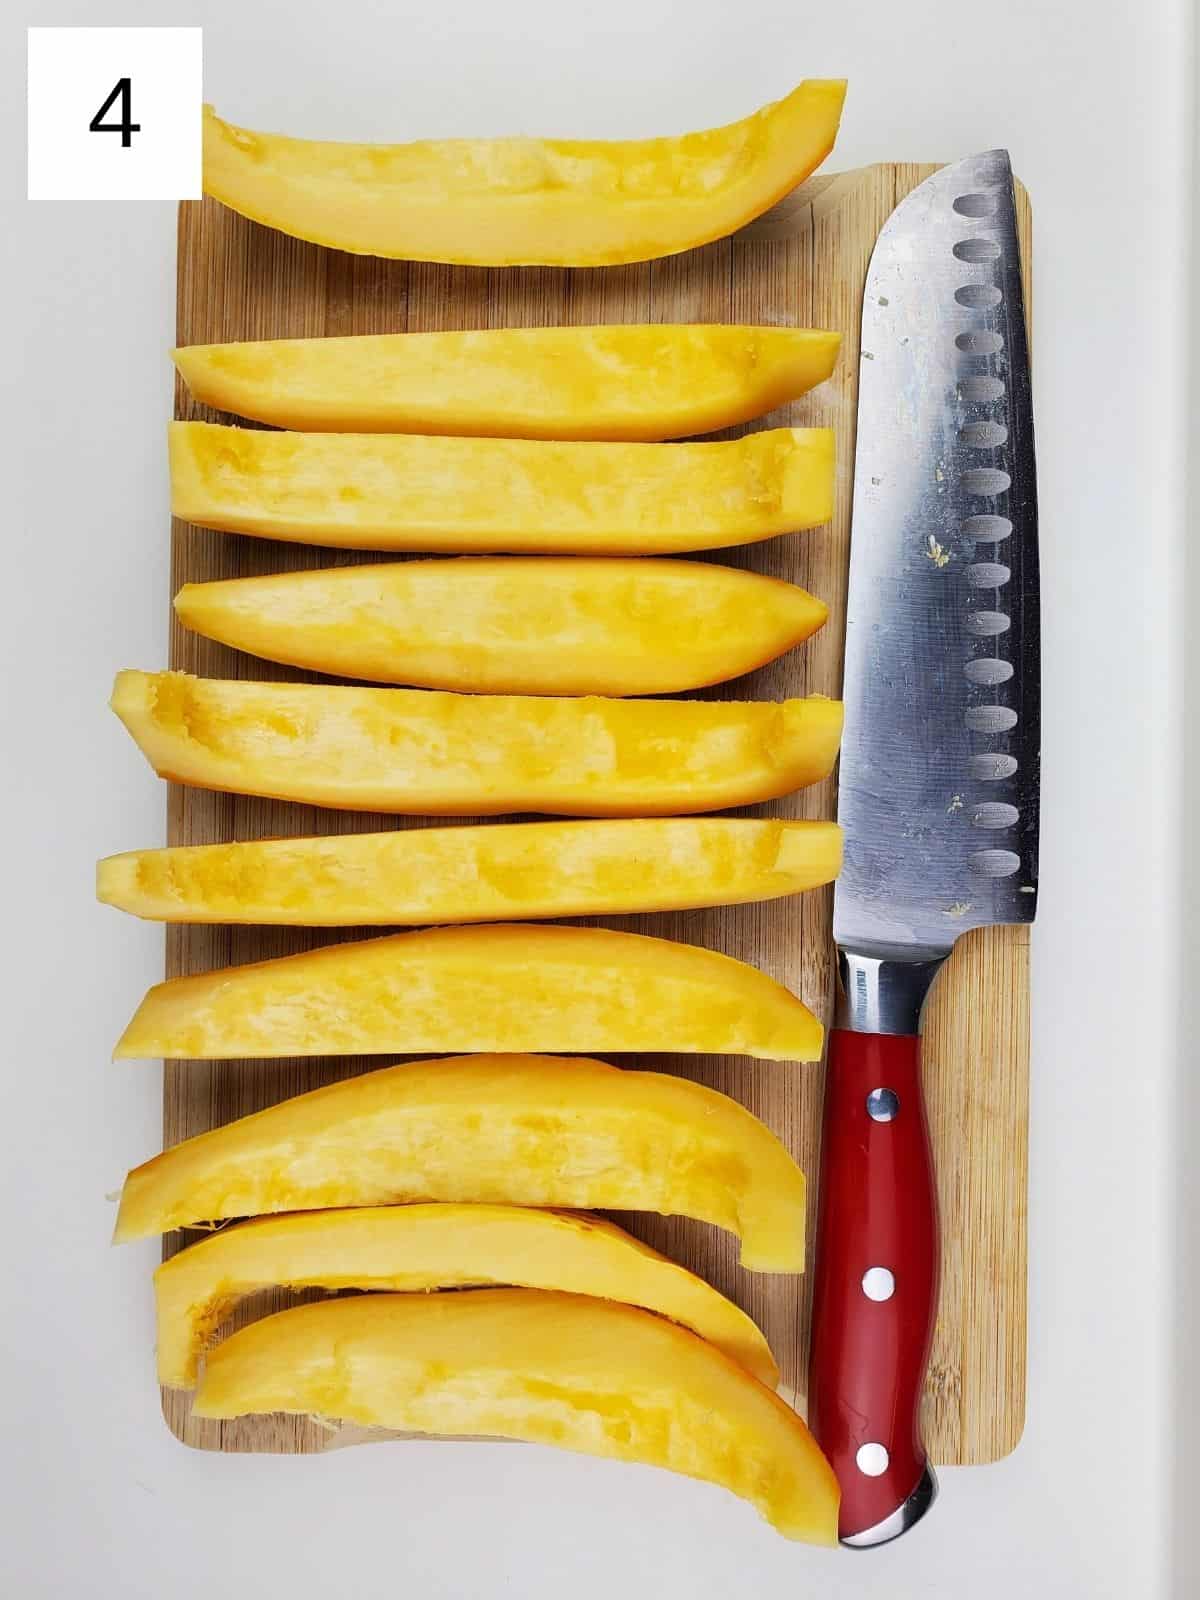 lengthwise slices of delicata squash on a wooden cutting board.